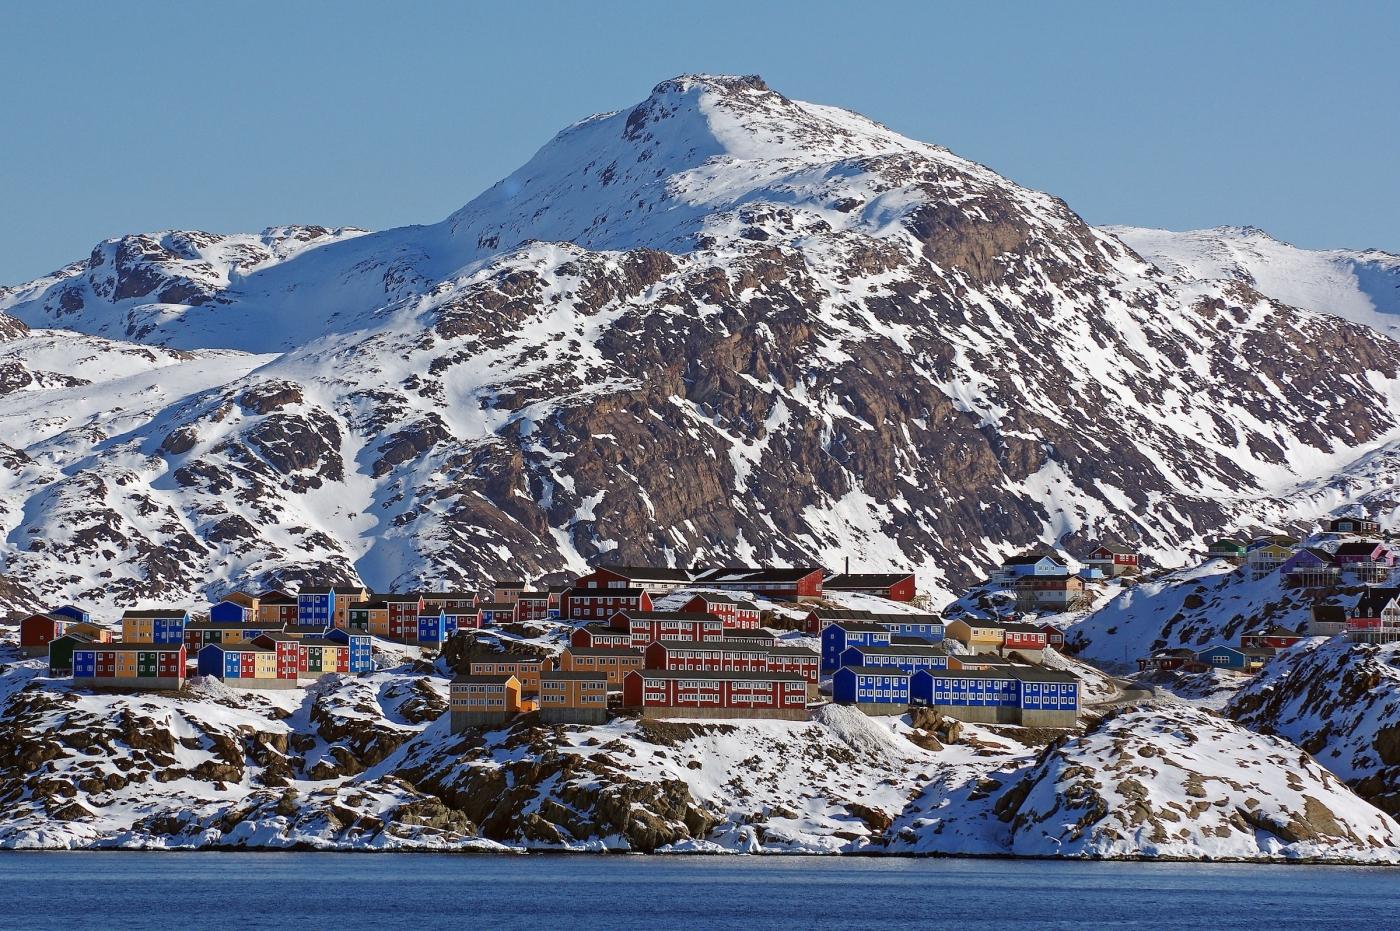 Colourful houses stand out against the winter landscape in Sisimiut, Destination Arctic Circle. Photo by Reinhard Pantke - Visit Greenland.